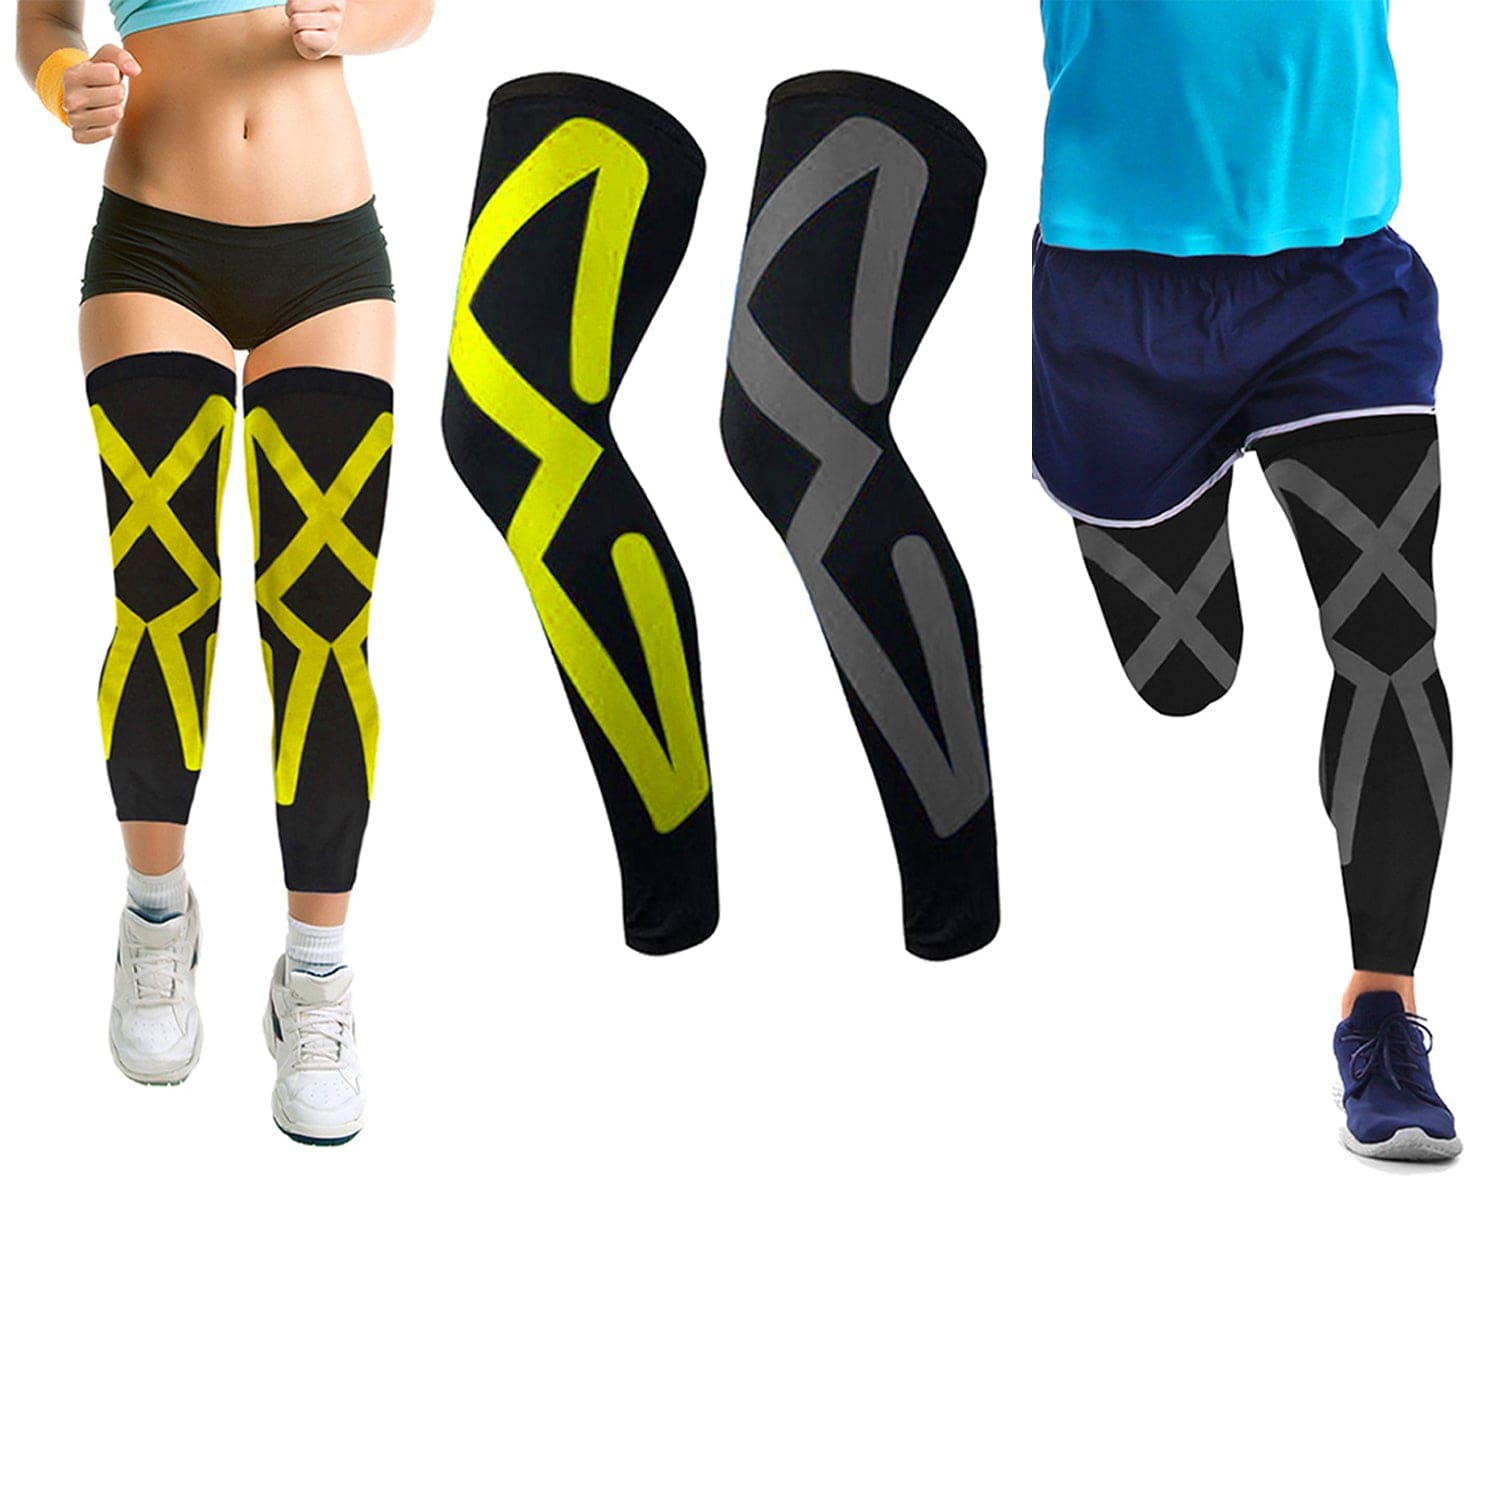 Thigh & Knee & Calf Kinetic Tape Compression Leggings L20 [ver.1]